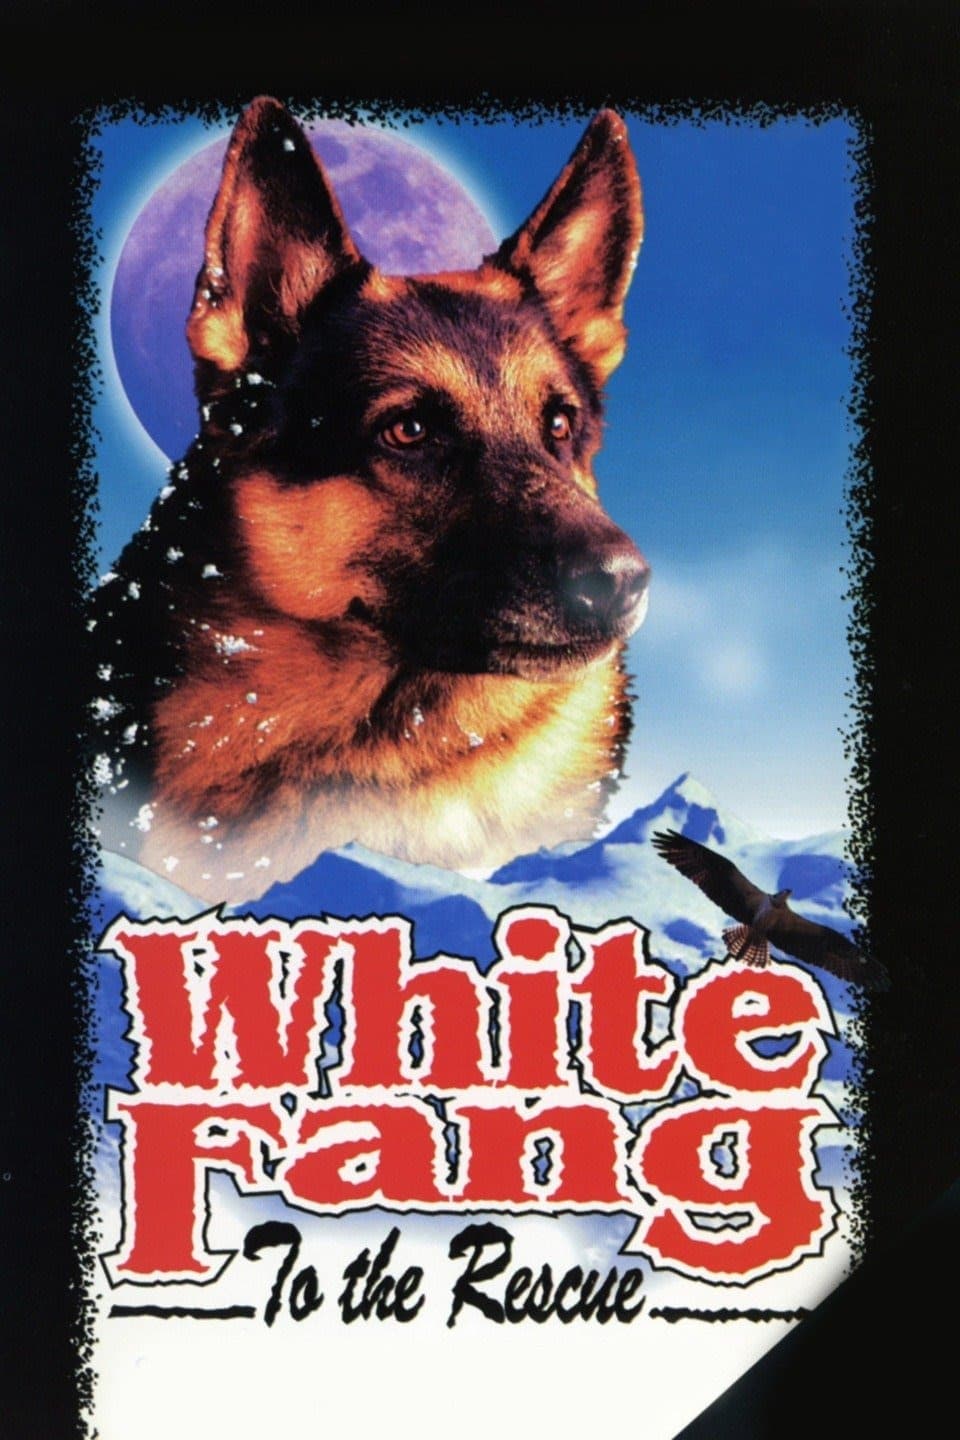 White Fang to the Rescue (1974)